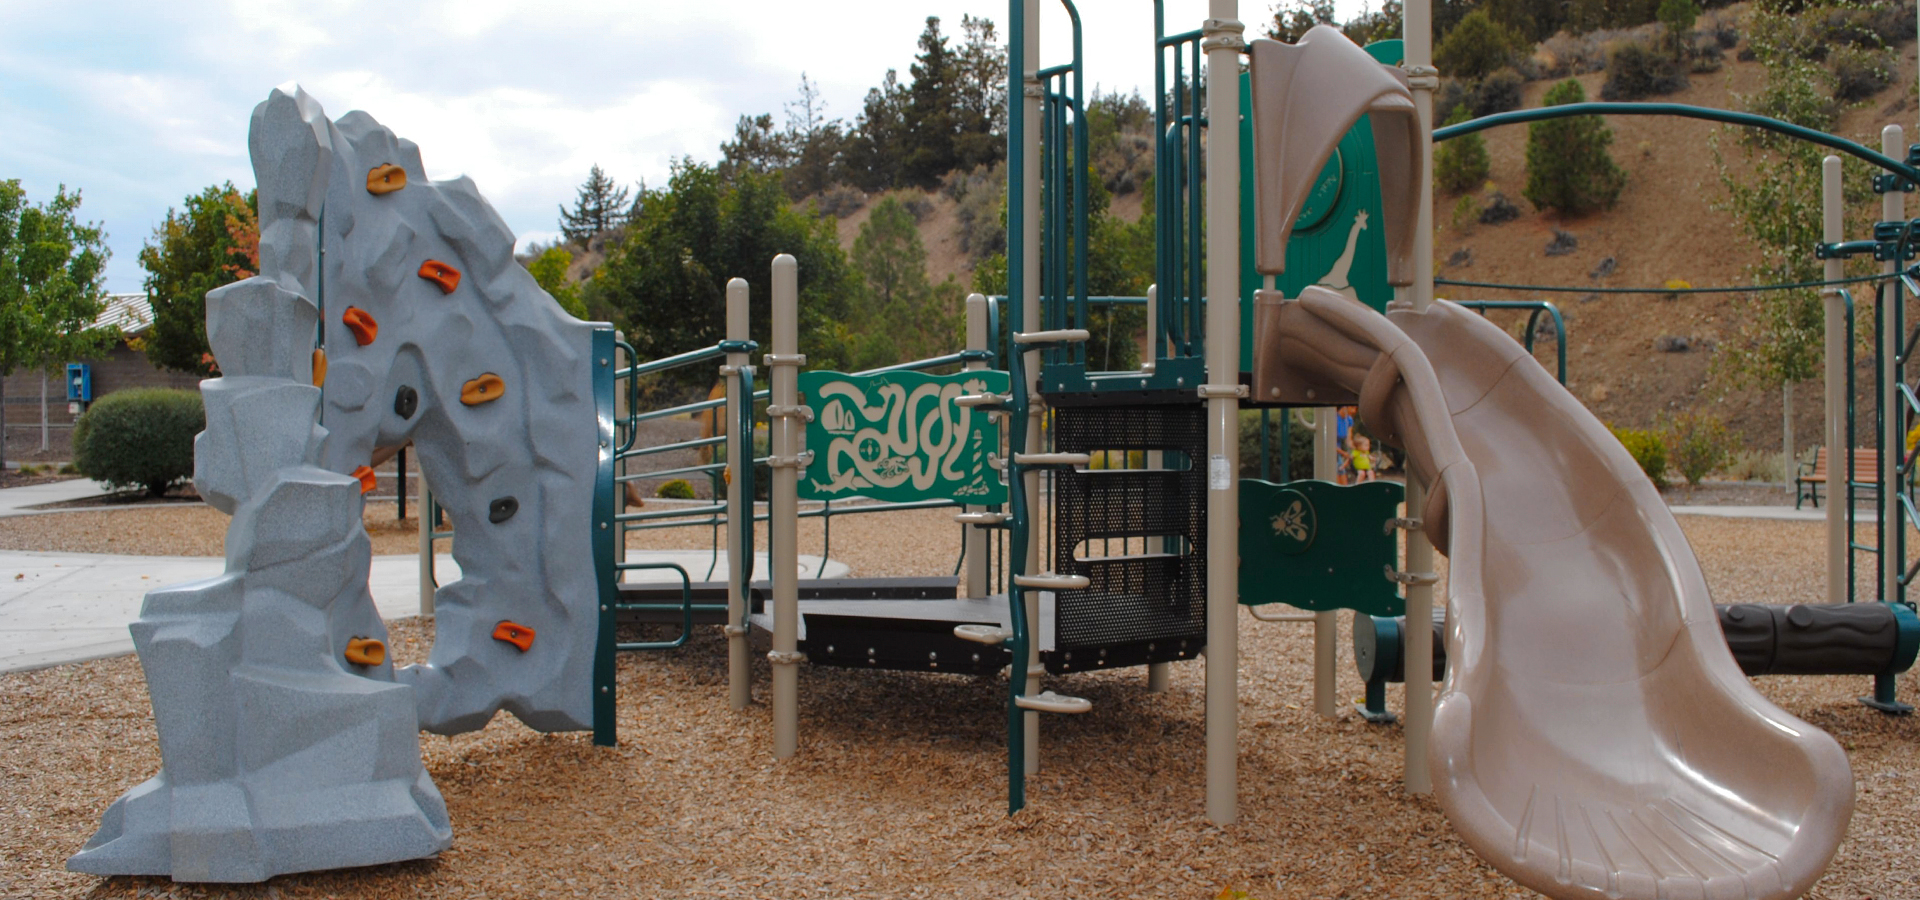 The play structure at Pilot Butte Park.